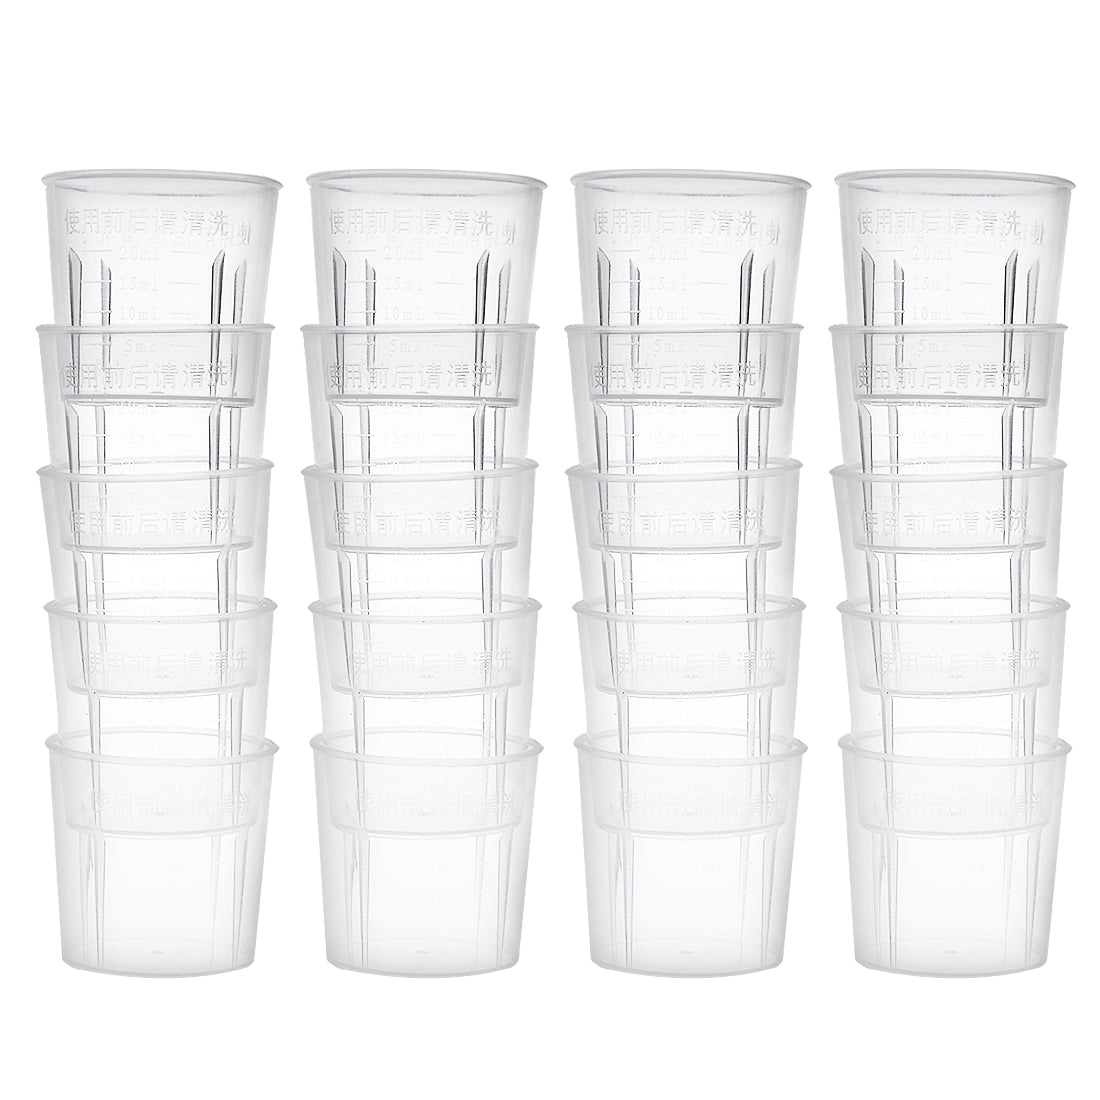 uxcell Uxcell 20pcs Measuring Cup Labs PP Graduated Beakers 20ml